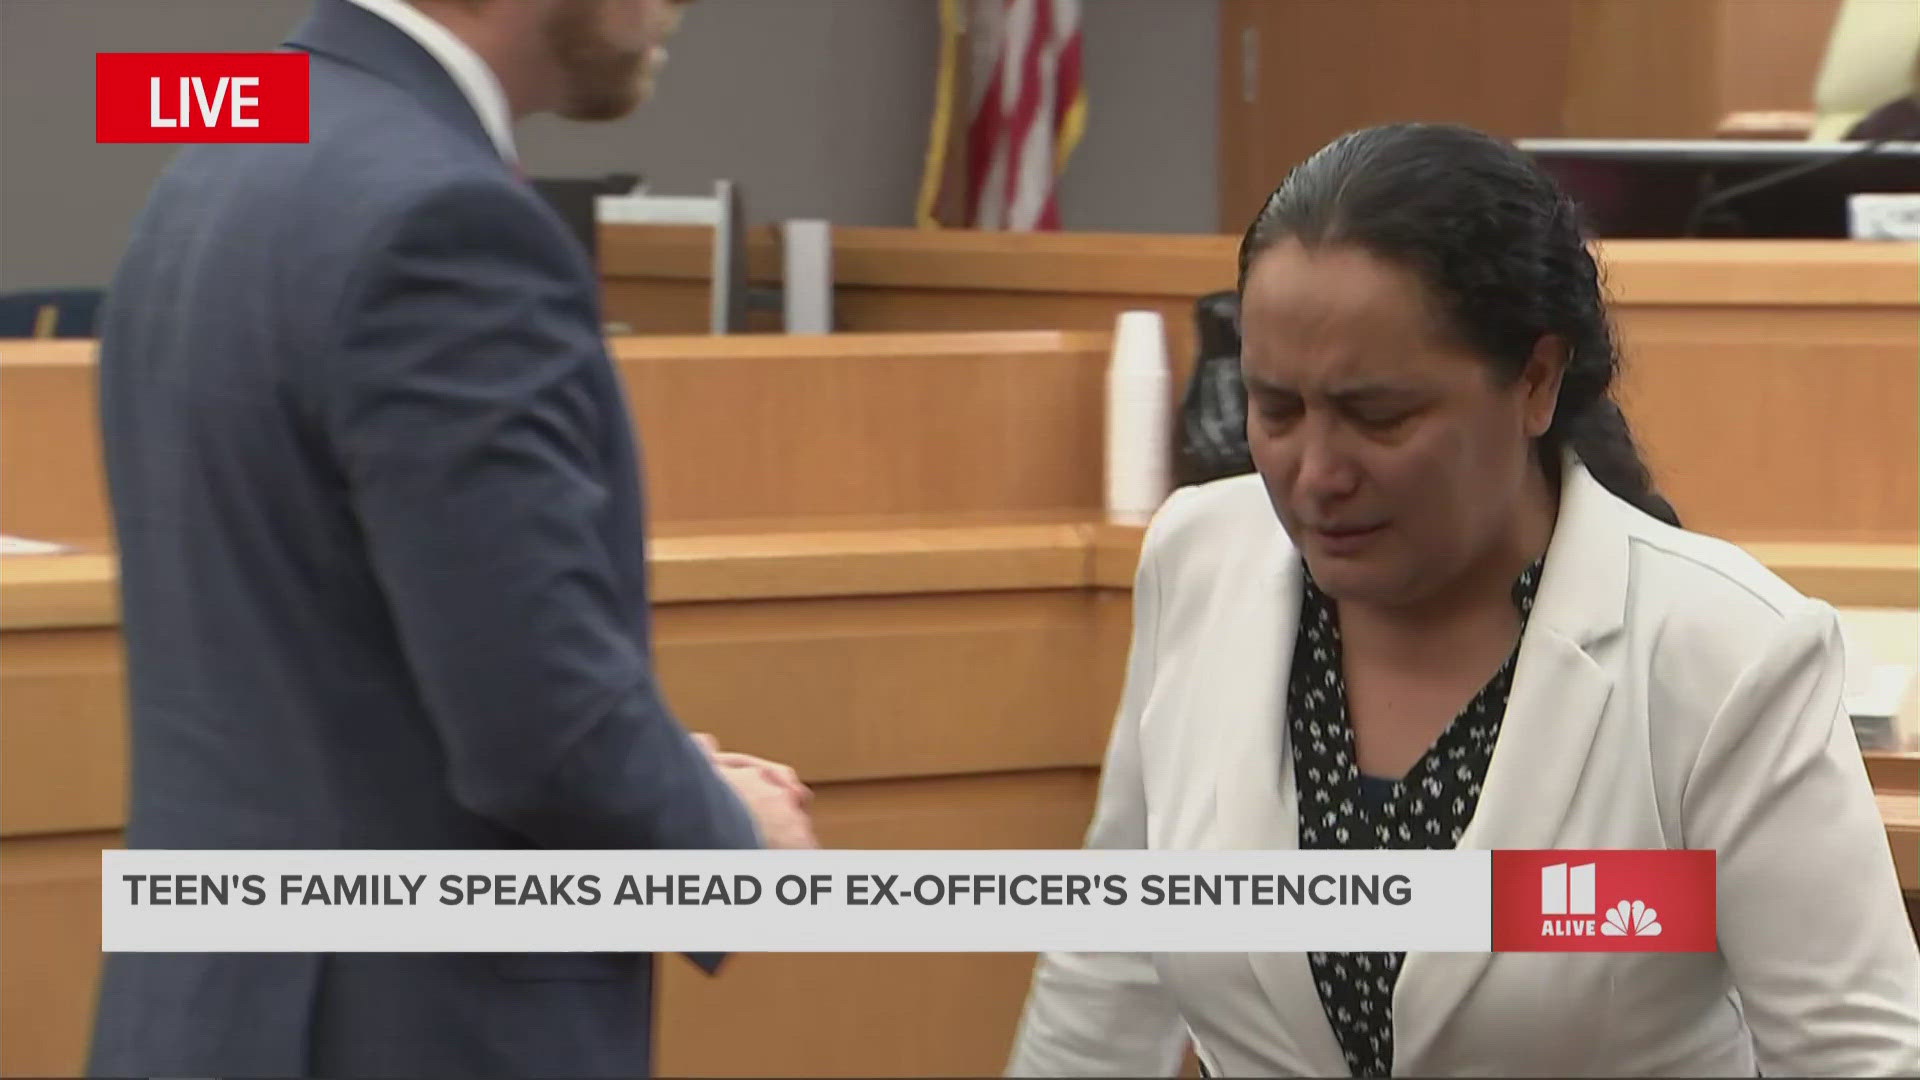 The judge told the grieving mom that "Susana did not deserve this."